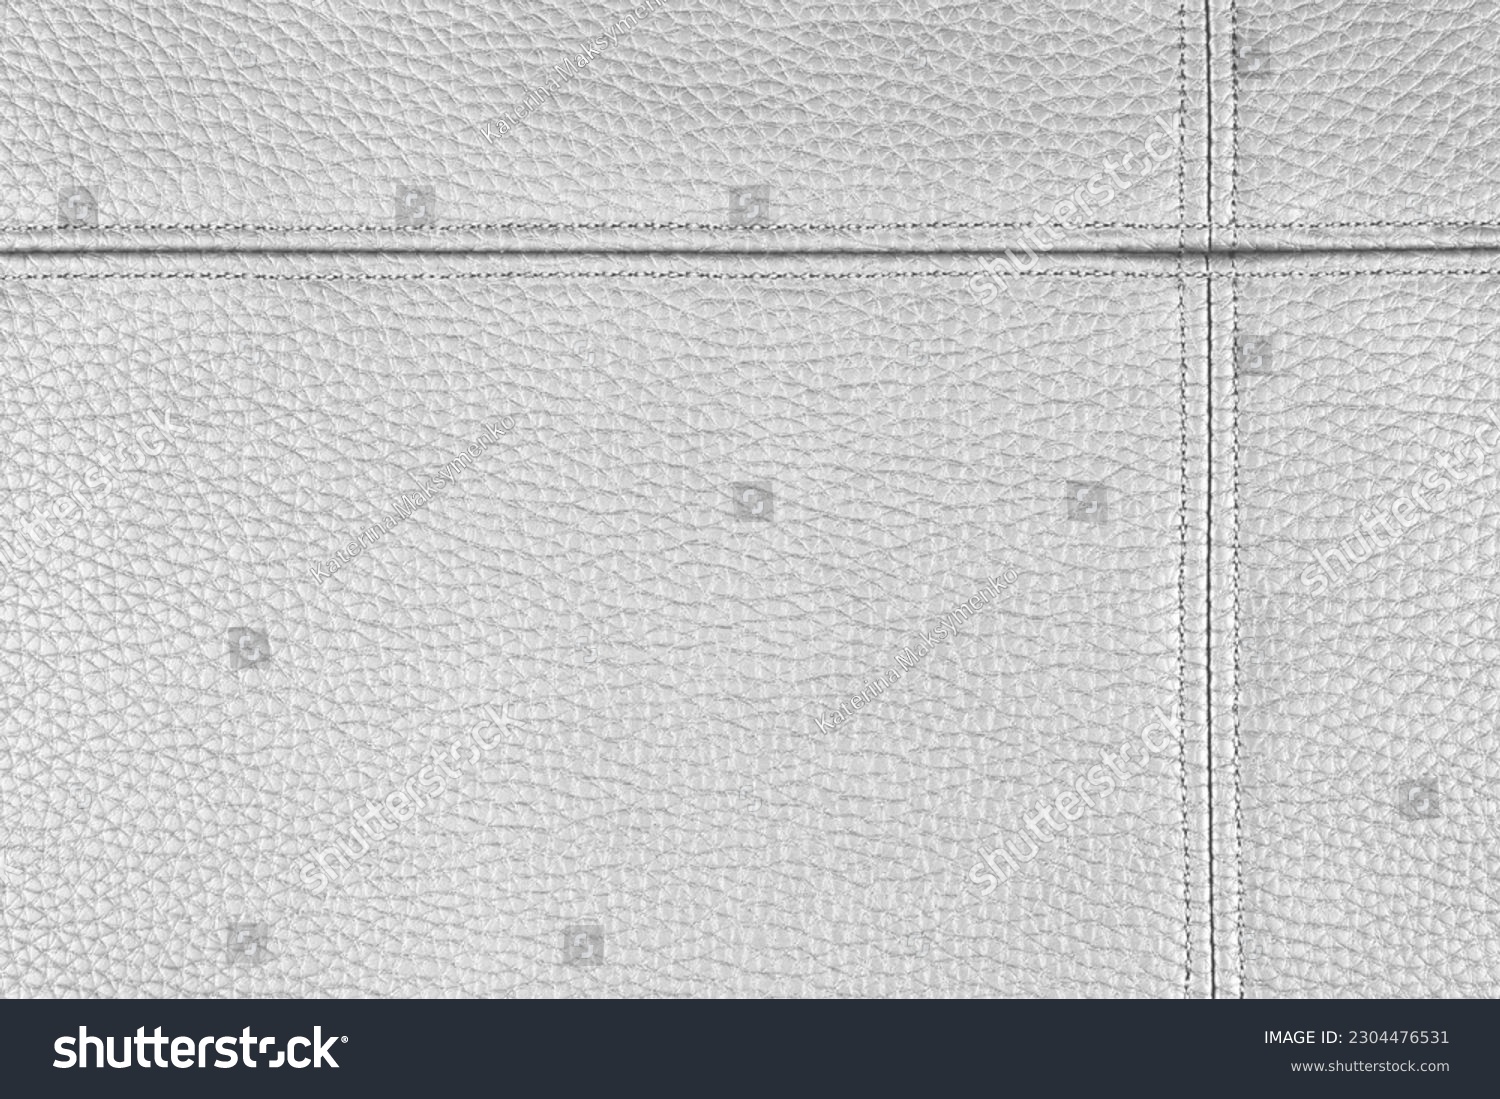 Natural, artificial silver gray leather texture background with decorative seam. Material for sport items, clothes, furnitre and interior design. ecological friendly leatherette. #2304476531